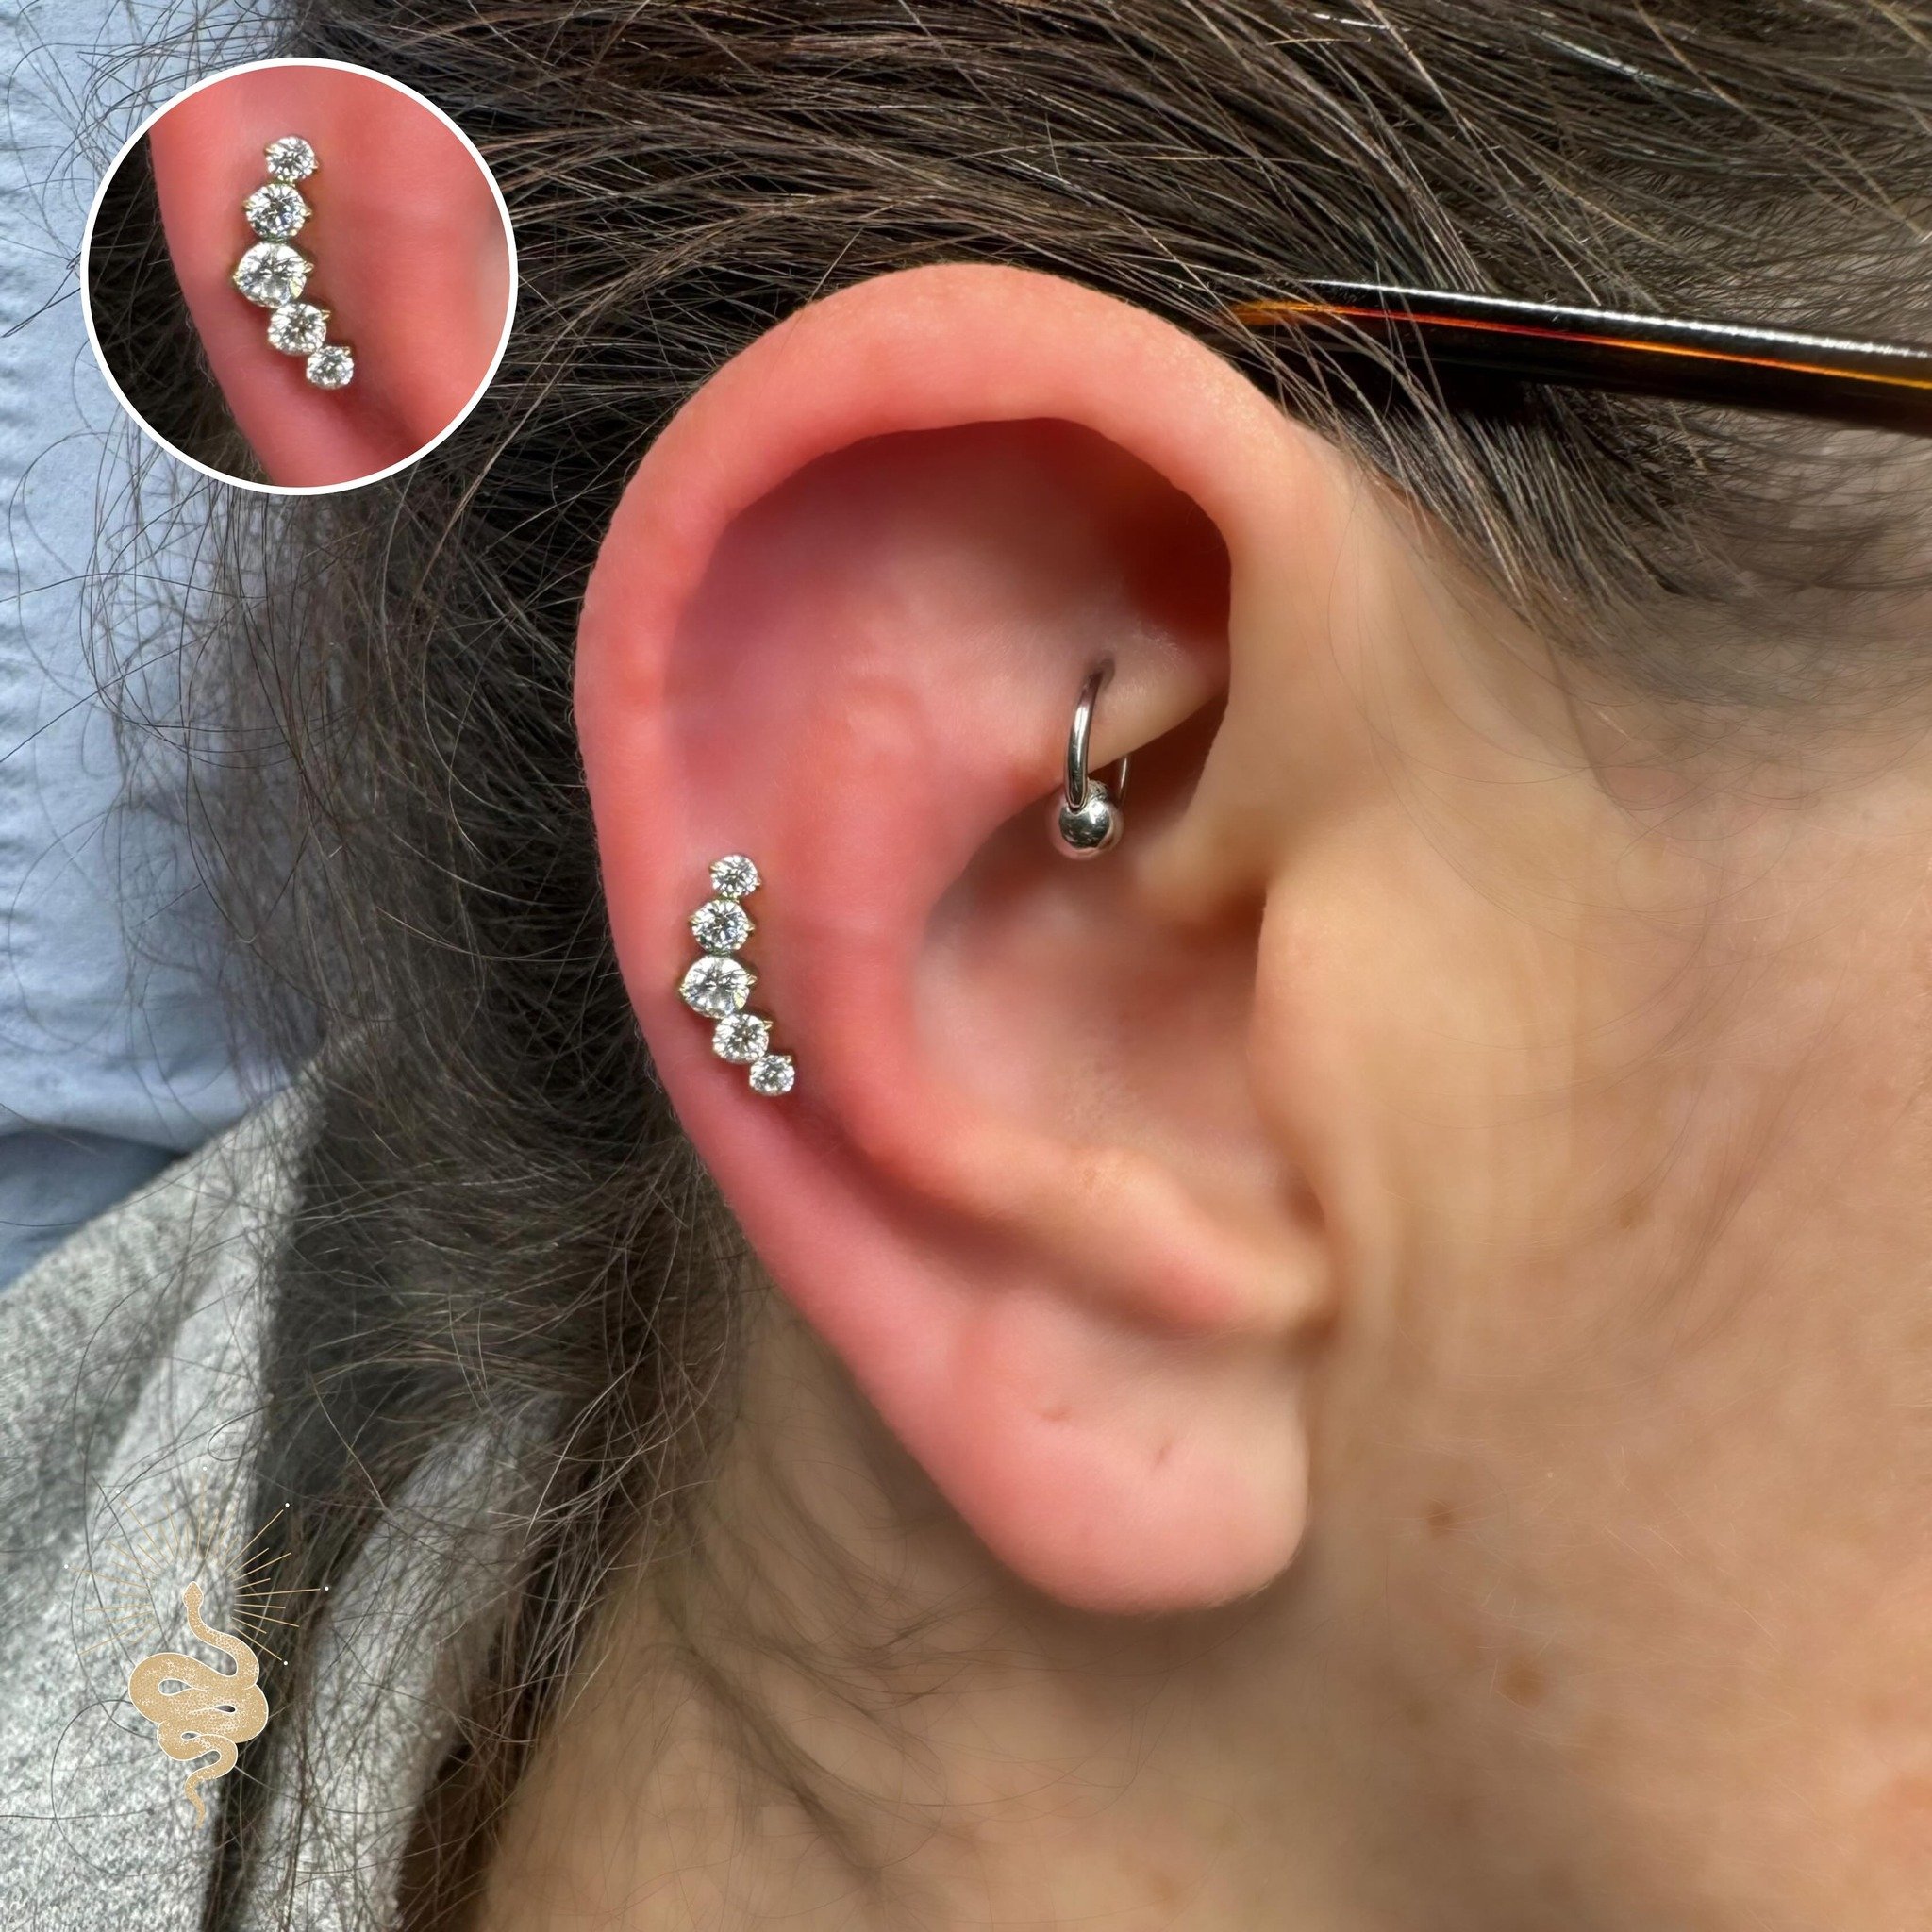 Pretty 5 stone cluster in mid helix 🤩

📍 Studio 59 Tattoos
3-5 Victoria Road, MK2 2NG Milton Keynes
💌 Message to book in - or ring 01908 990232 📞

#piercing #piercings #tattoo #bodypiercing #pierced #piercer #safepiercing #septum #helixpiercing #